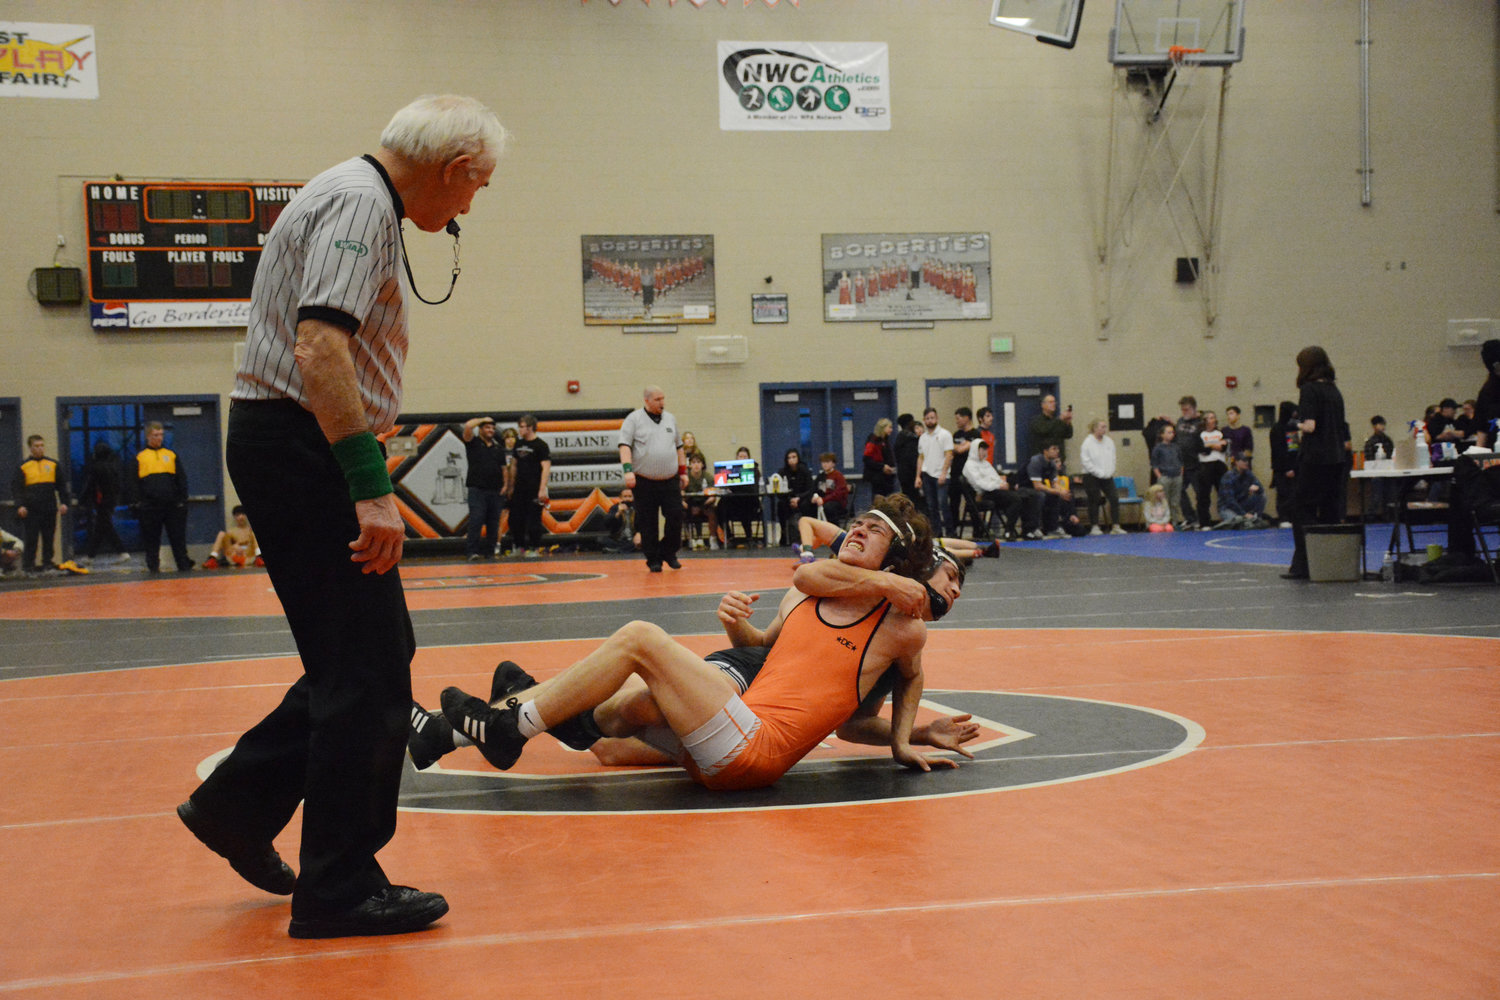 A Blaine wrestler competes at Battle at the Border in Blaine on December 9.